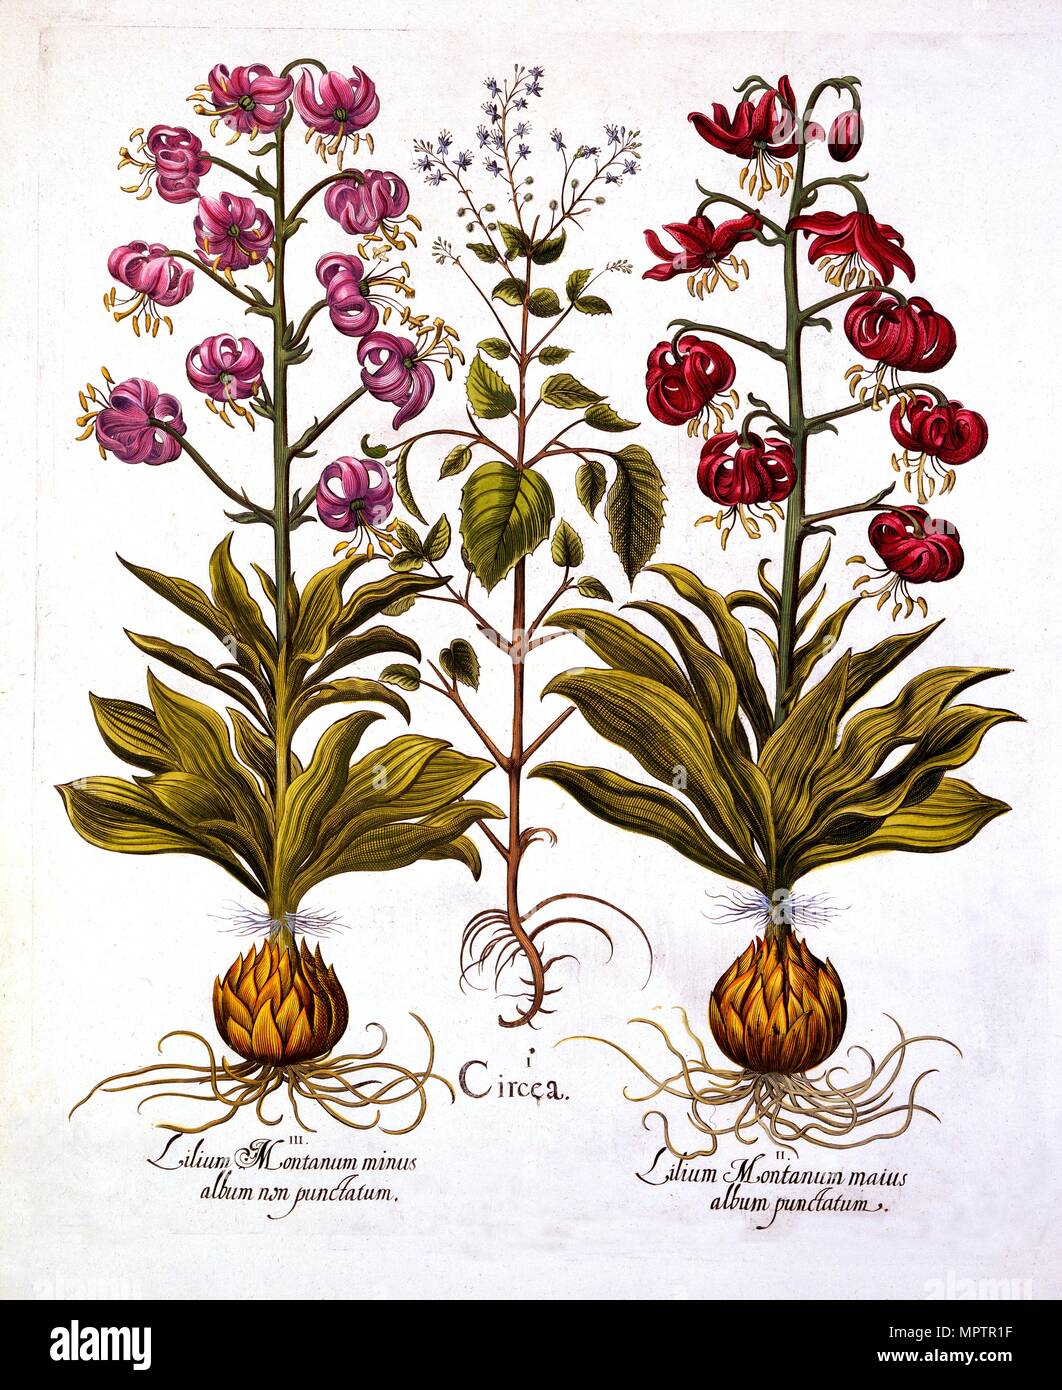 Turk's Cap Lily and Enchanter's Nightshade, from 'Hortus Eystettensis', by Basil Besler (1561-1629), Stock Photo